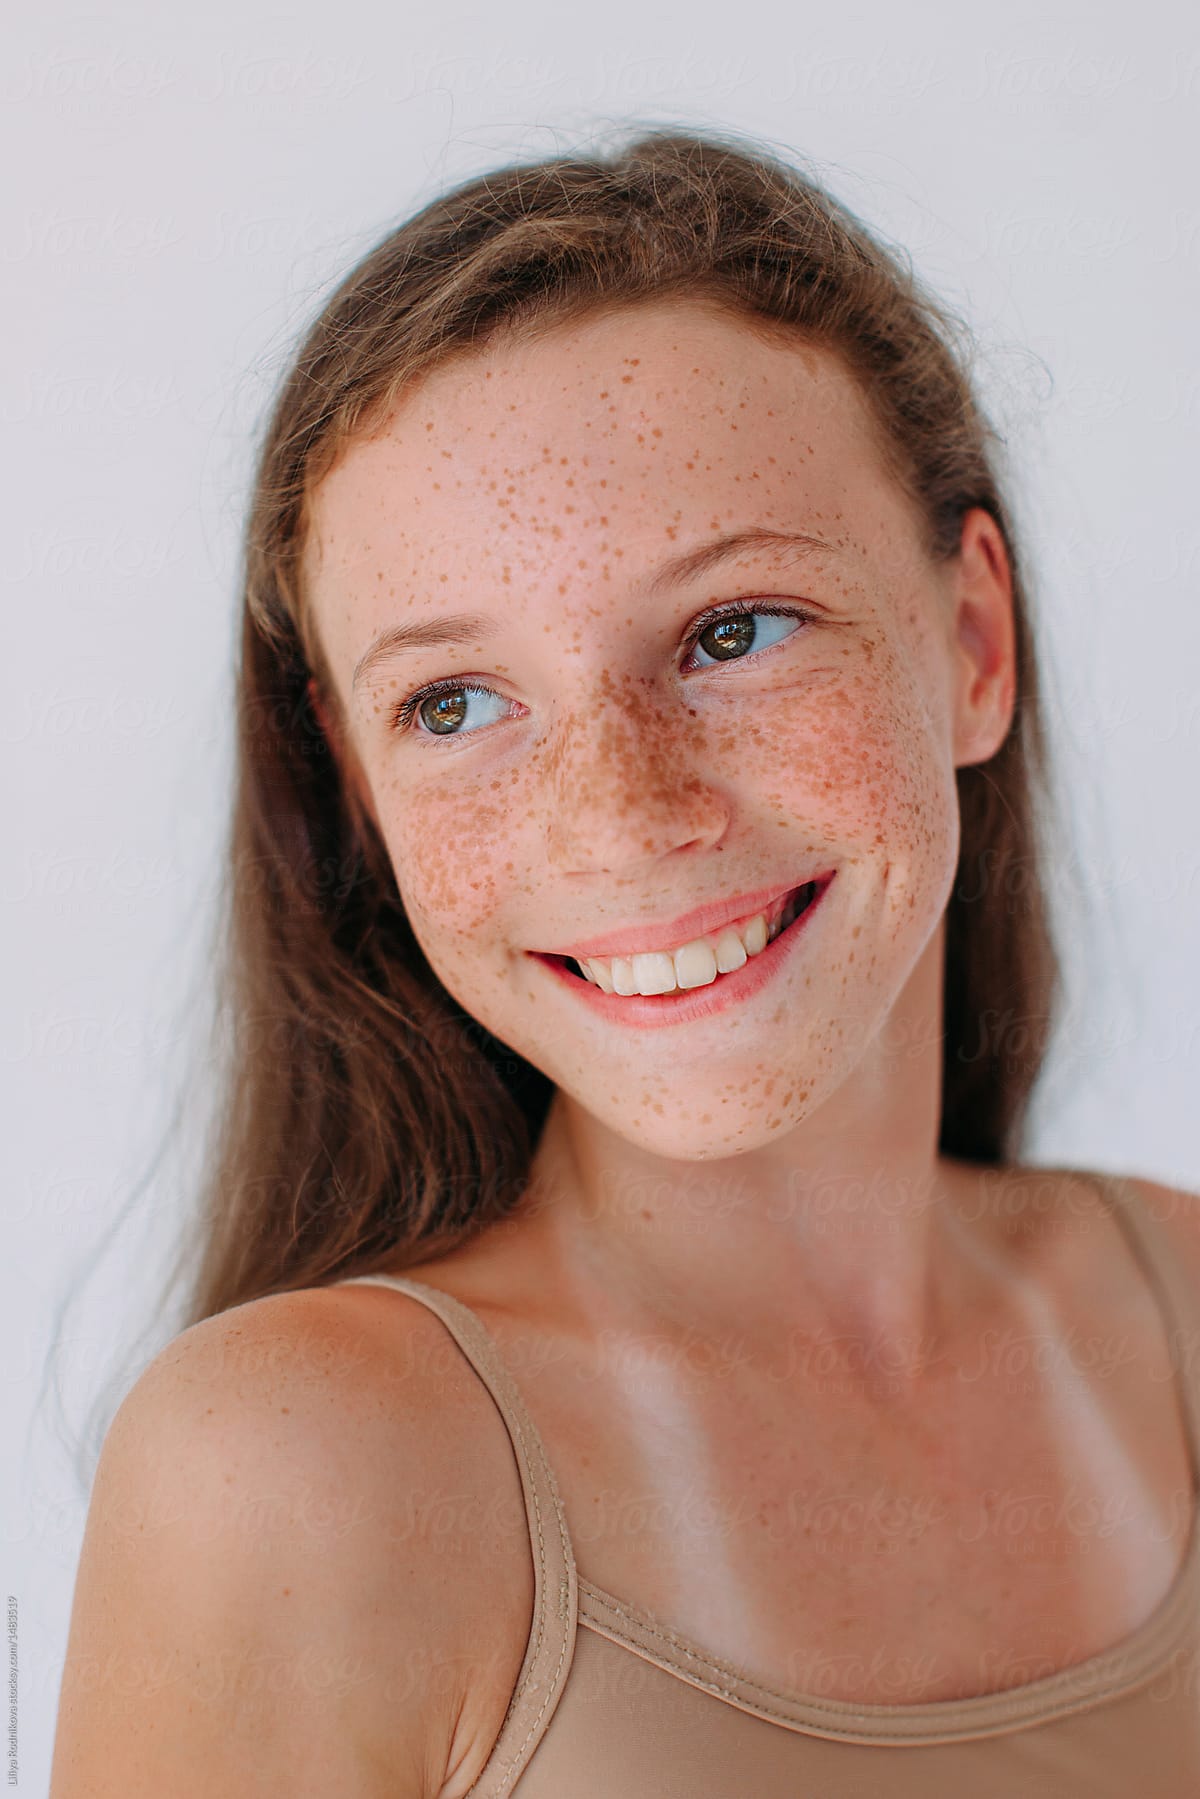 Beauty Portrait Of Attractive Smiling Girl With Freckles And Long Hair